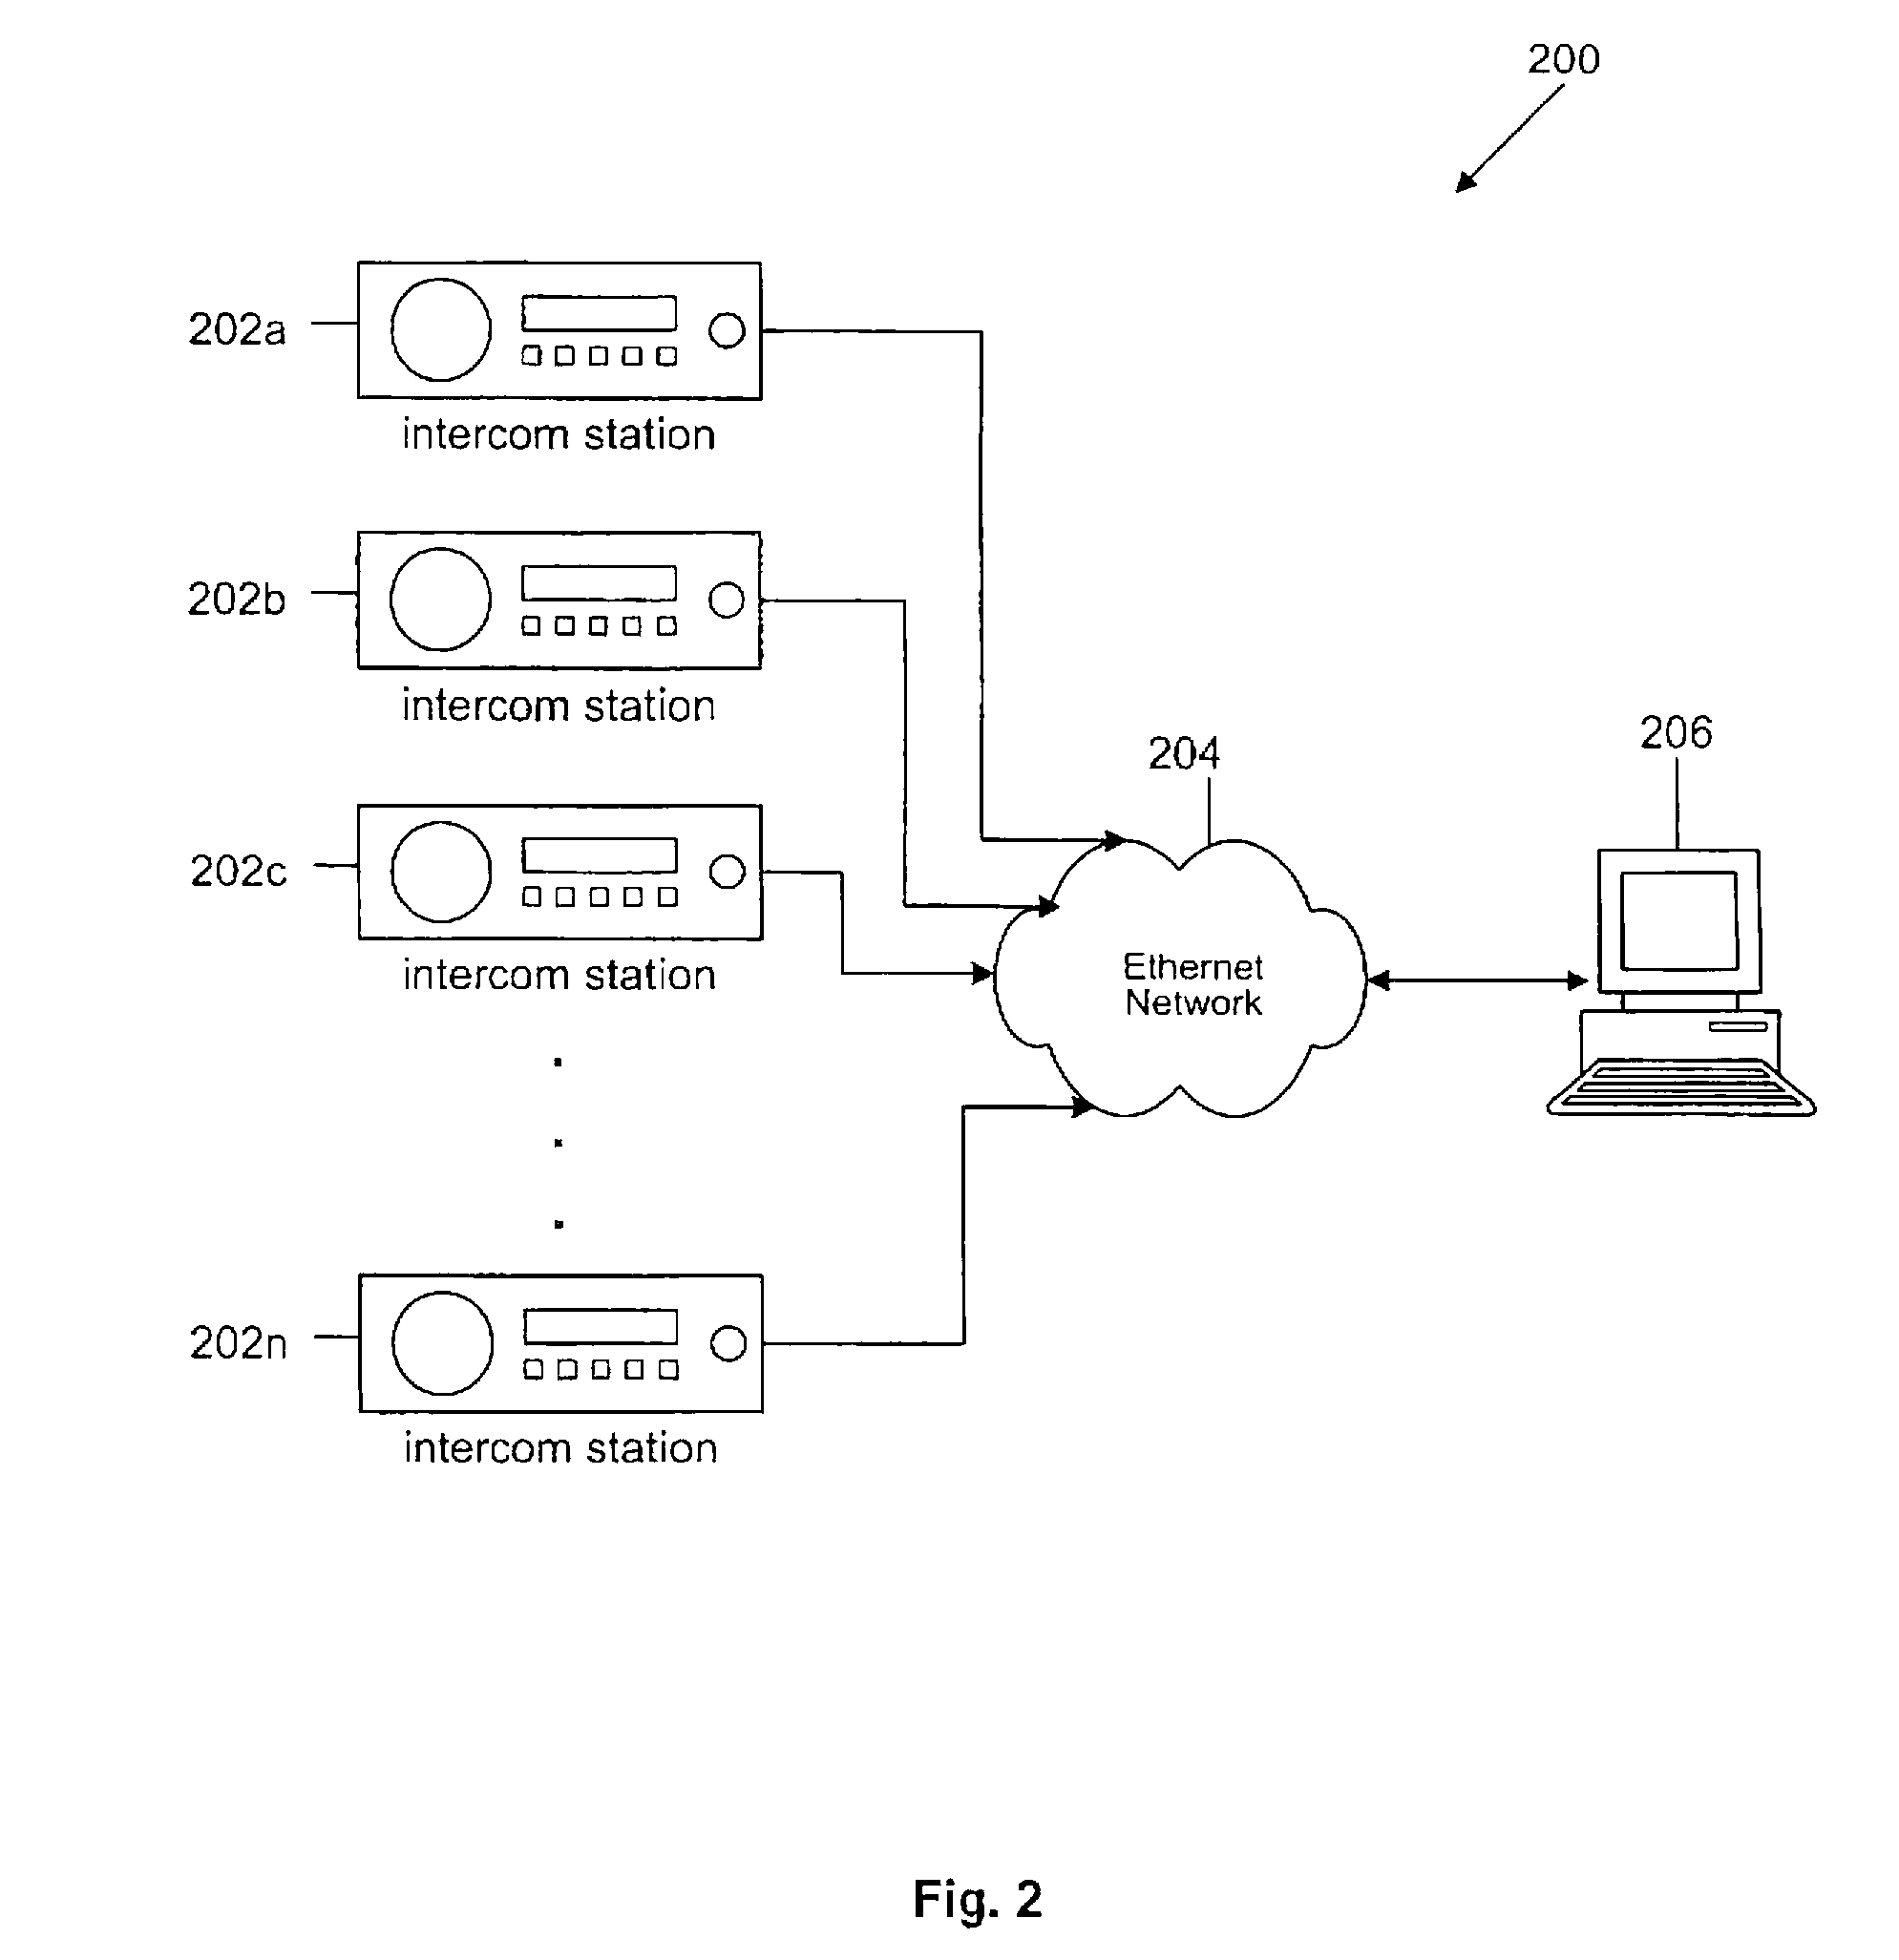 Scalable, distributed architecture for fully connected network intercom system